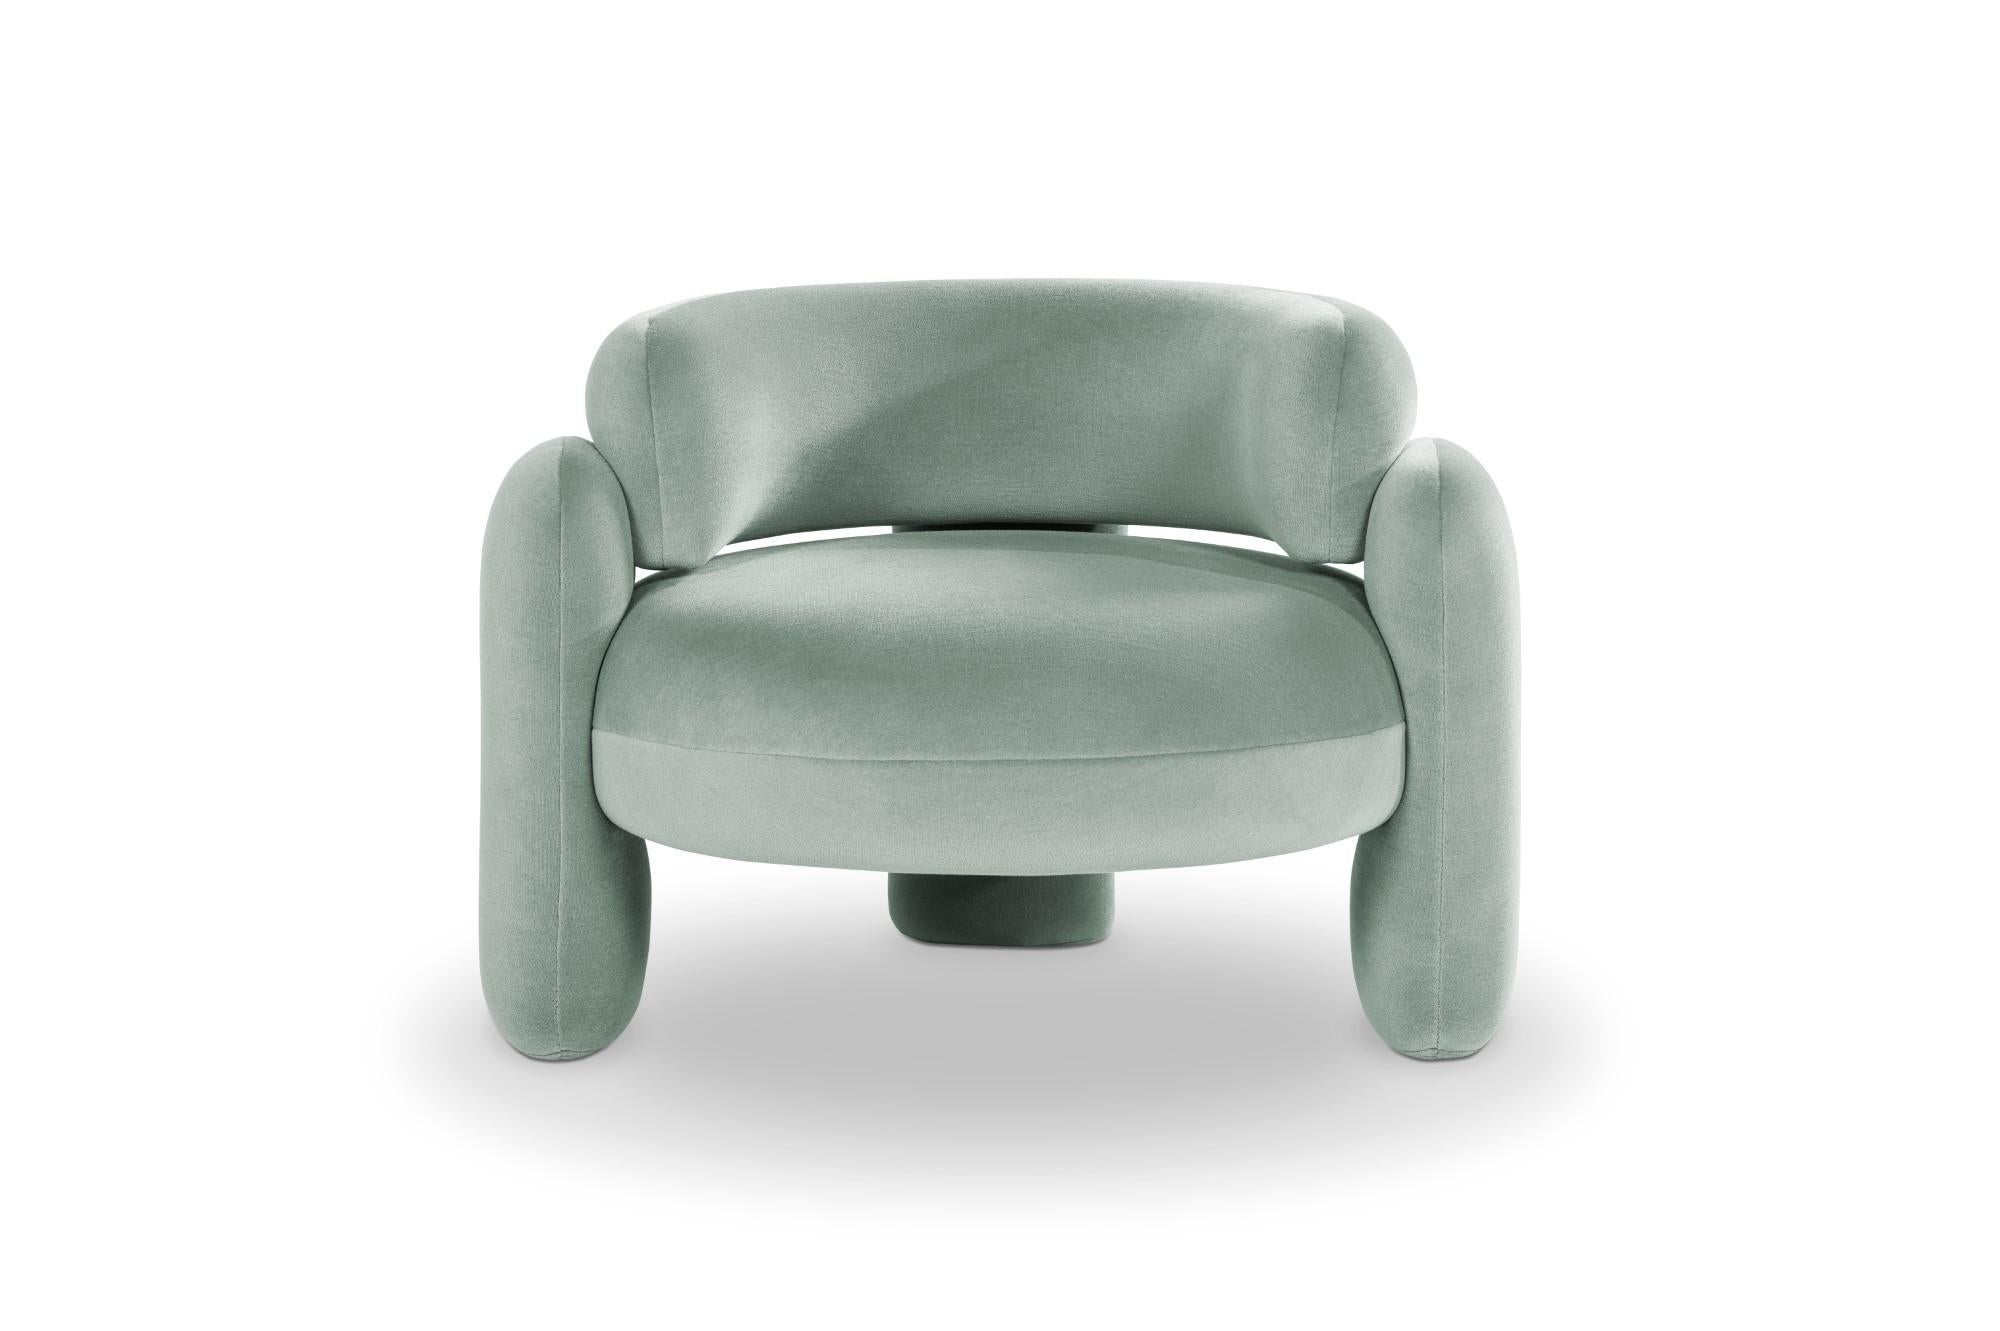 Embrace gentle 933 armchair by Royal Stranger 
Dimensions: W 96 x D 85 x H 68 cm.
Different upholstery colors and finishes are available. 
Materials: Upholstery.

Featuring an enfolding composition of geometrical shapes, the embrace armchair